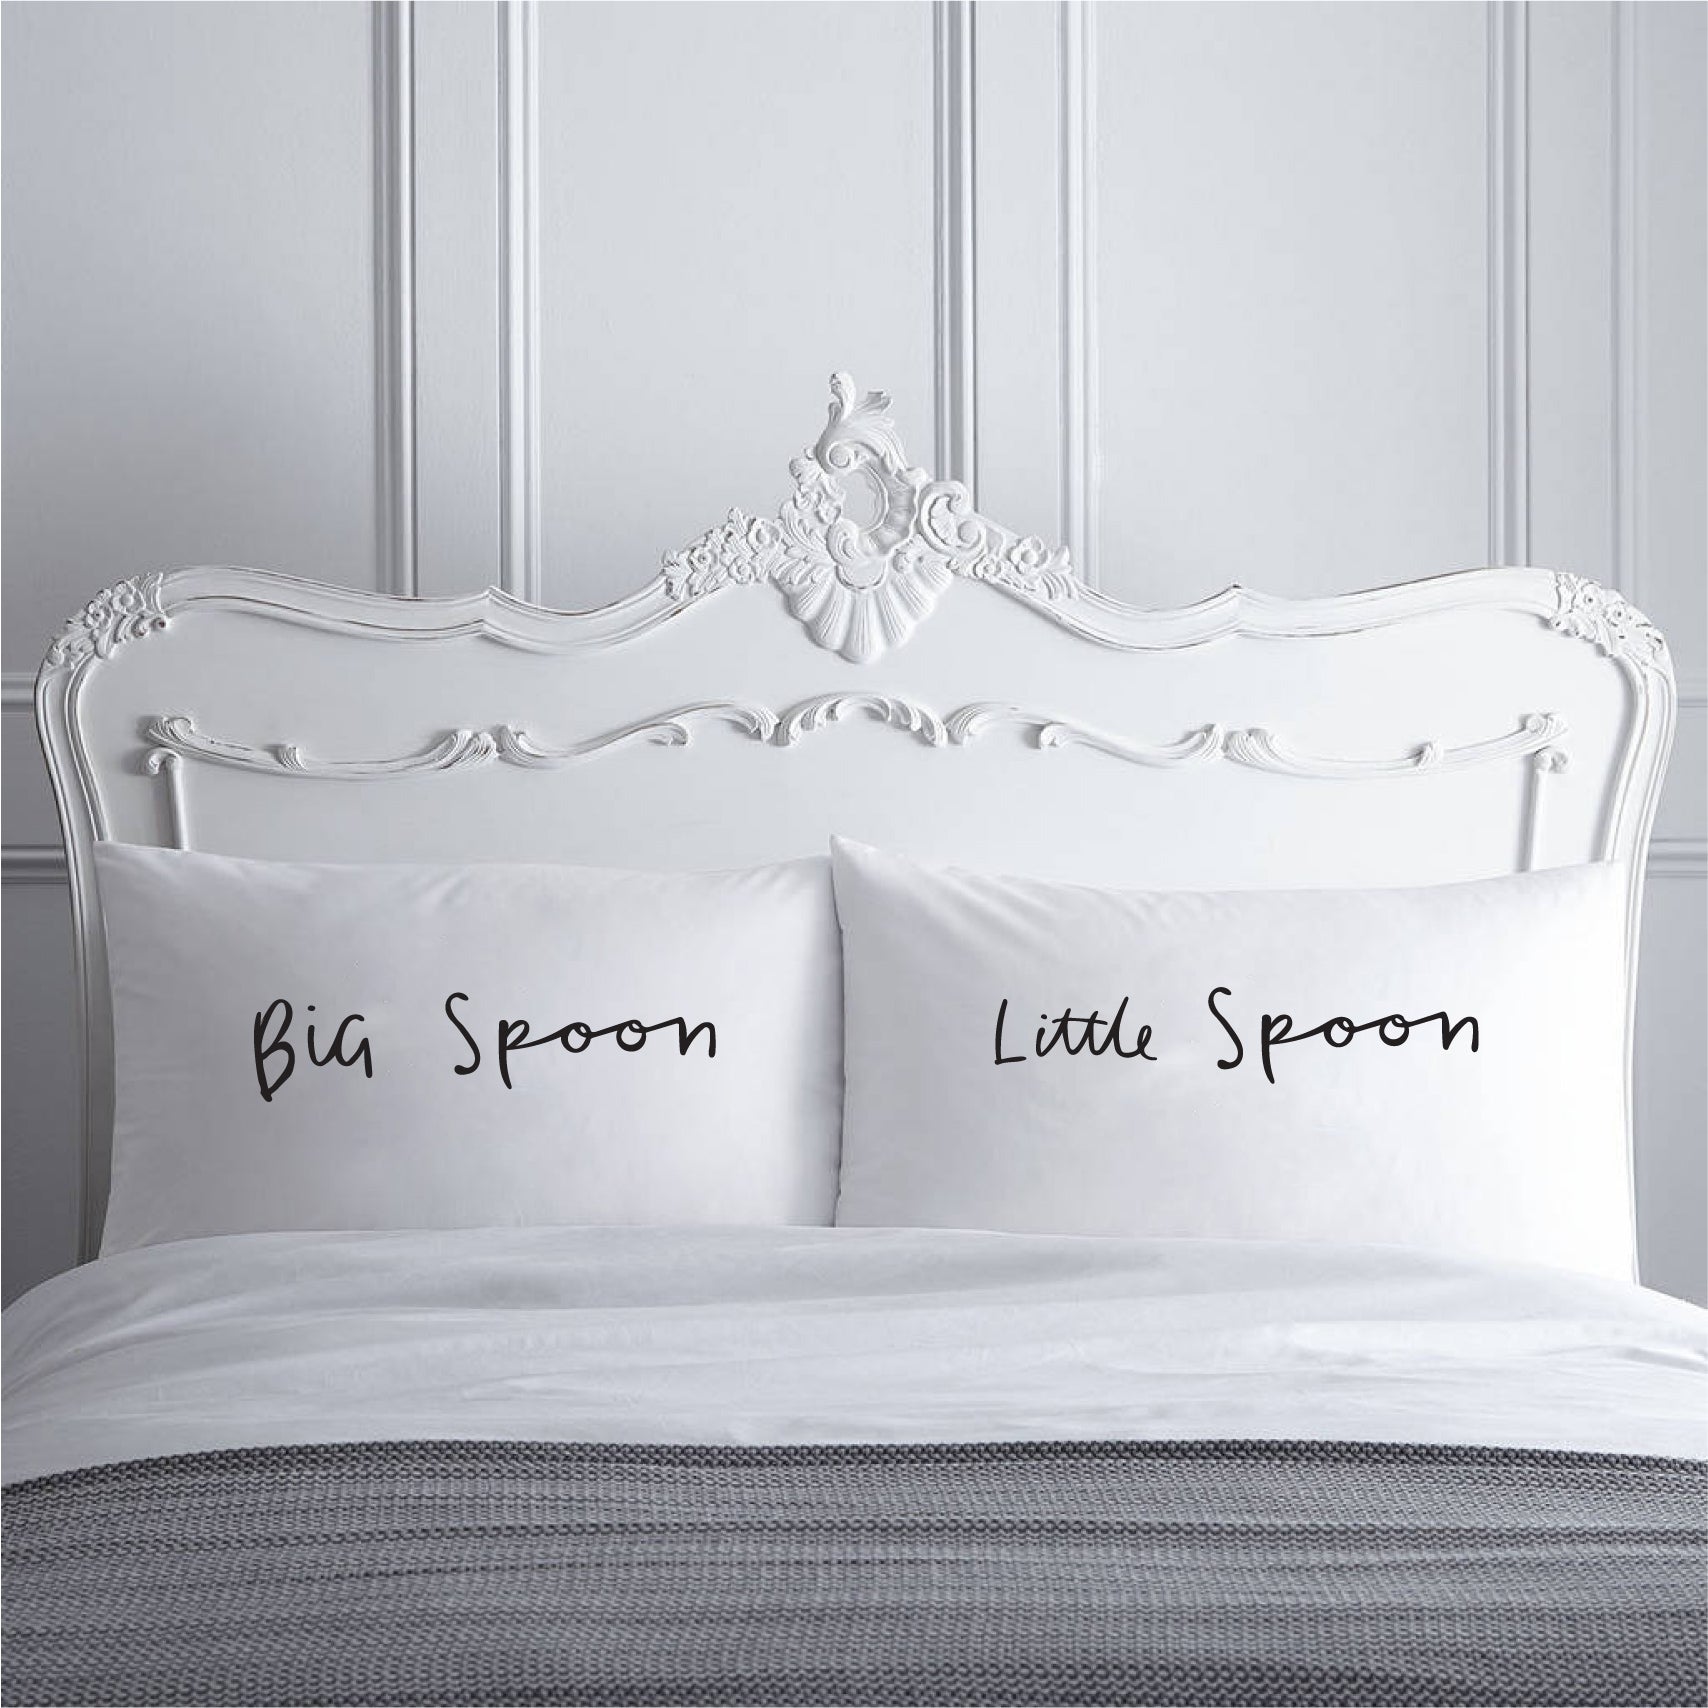 PS03- BIG SPOON & LITTLE SPOON PILLOW CASES - Shawshank Clothing 